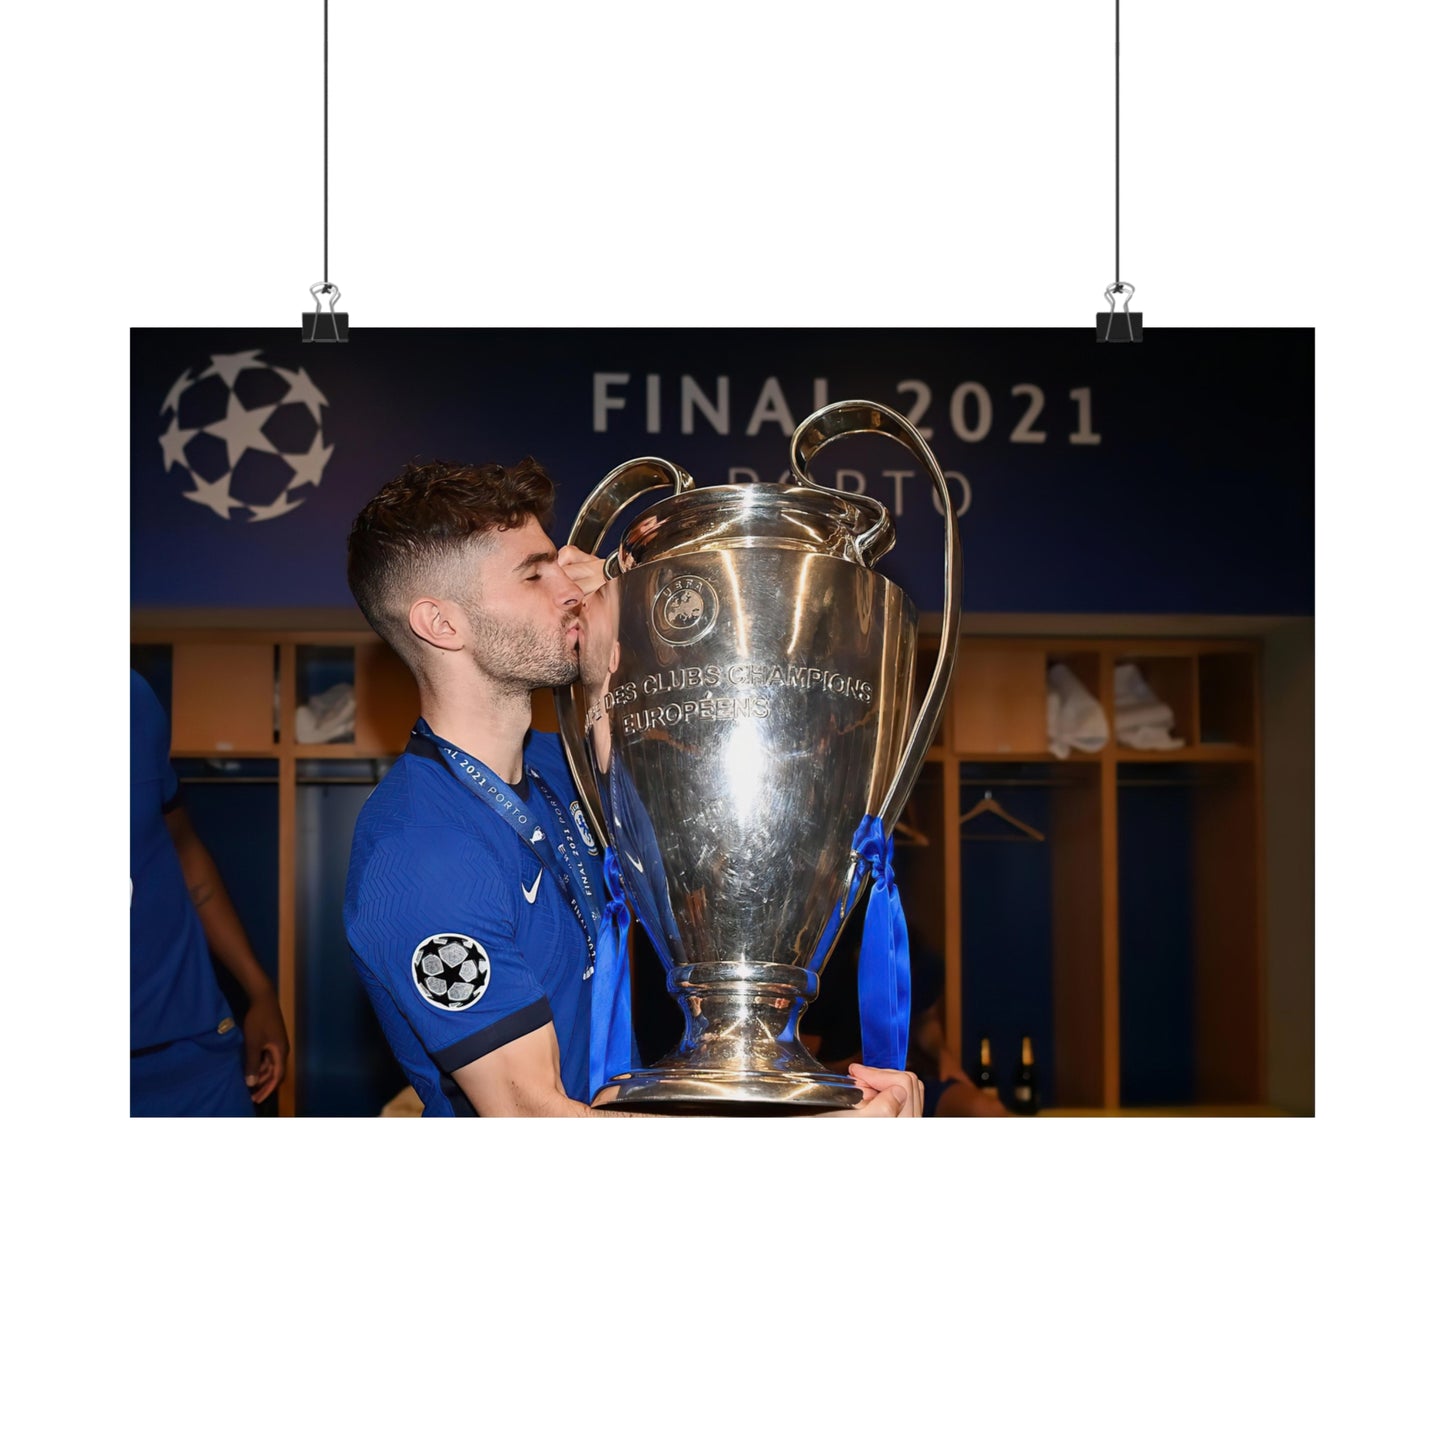 Christian Pulisic Kisses Champions League Trophy After Winning With Chelsea Poster